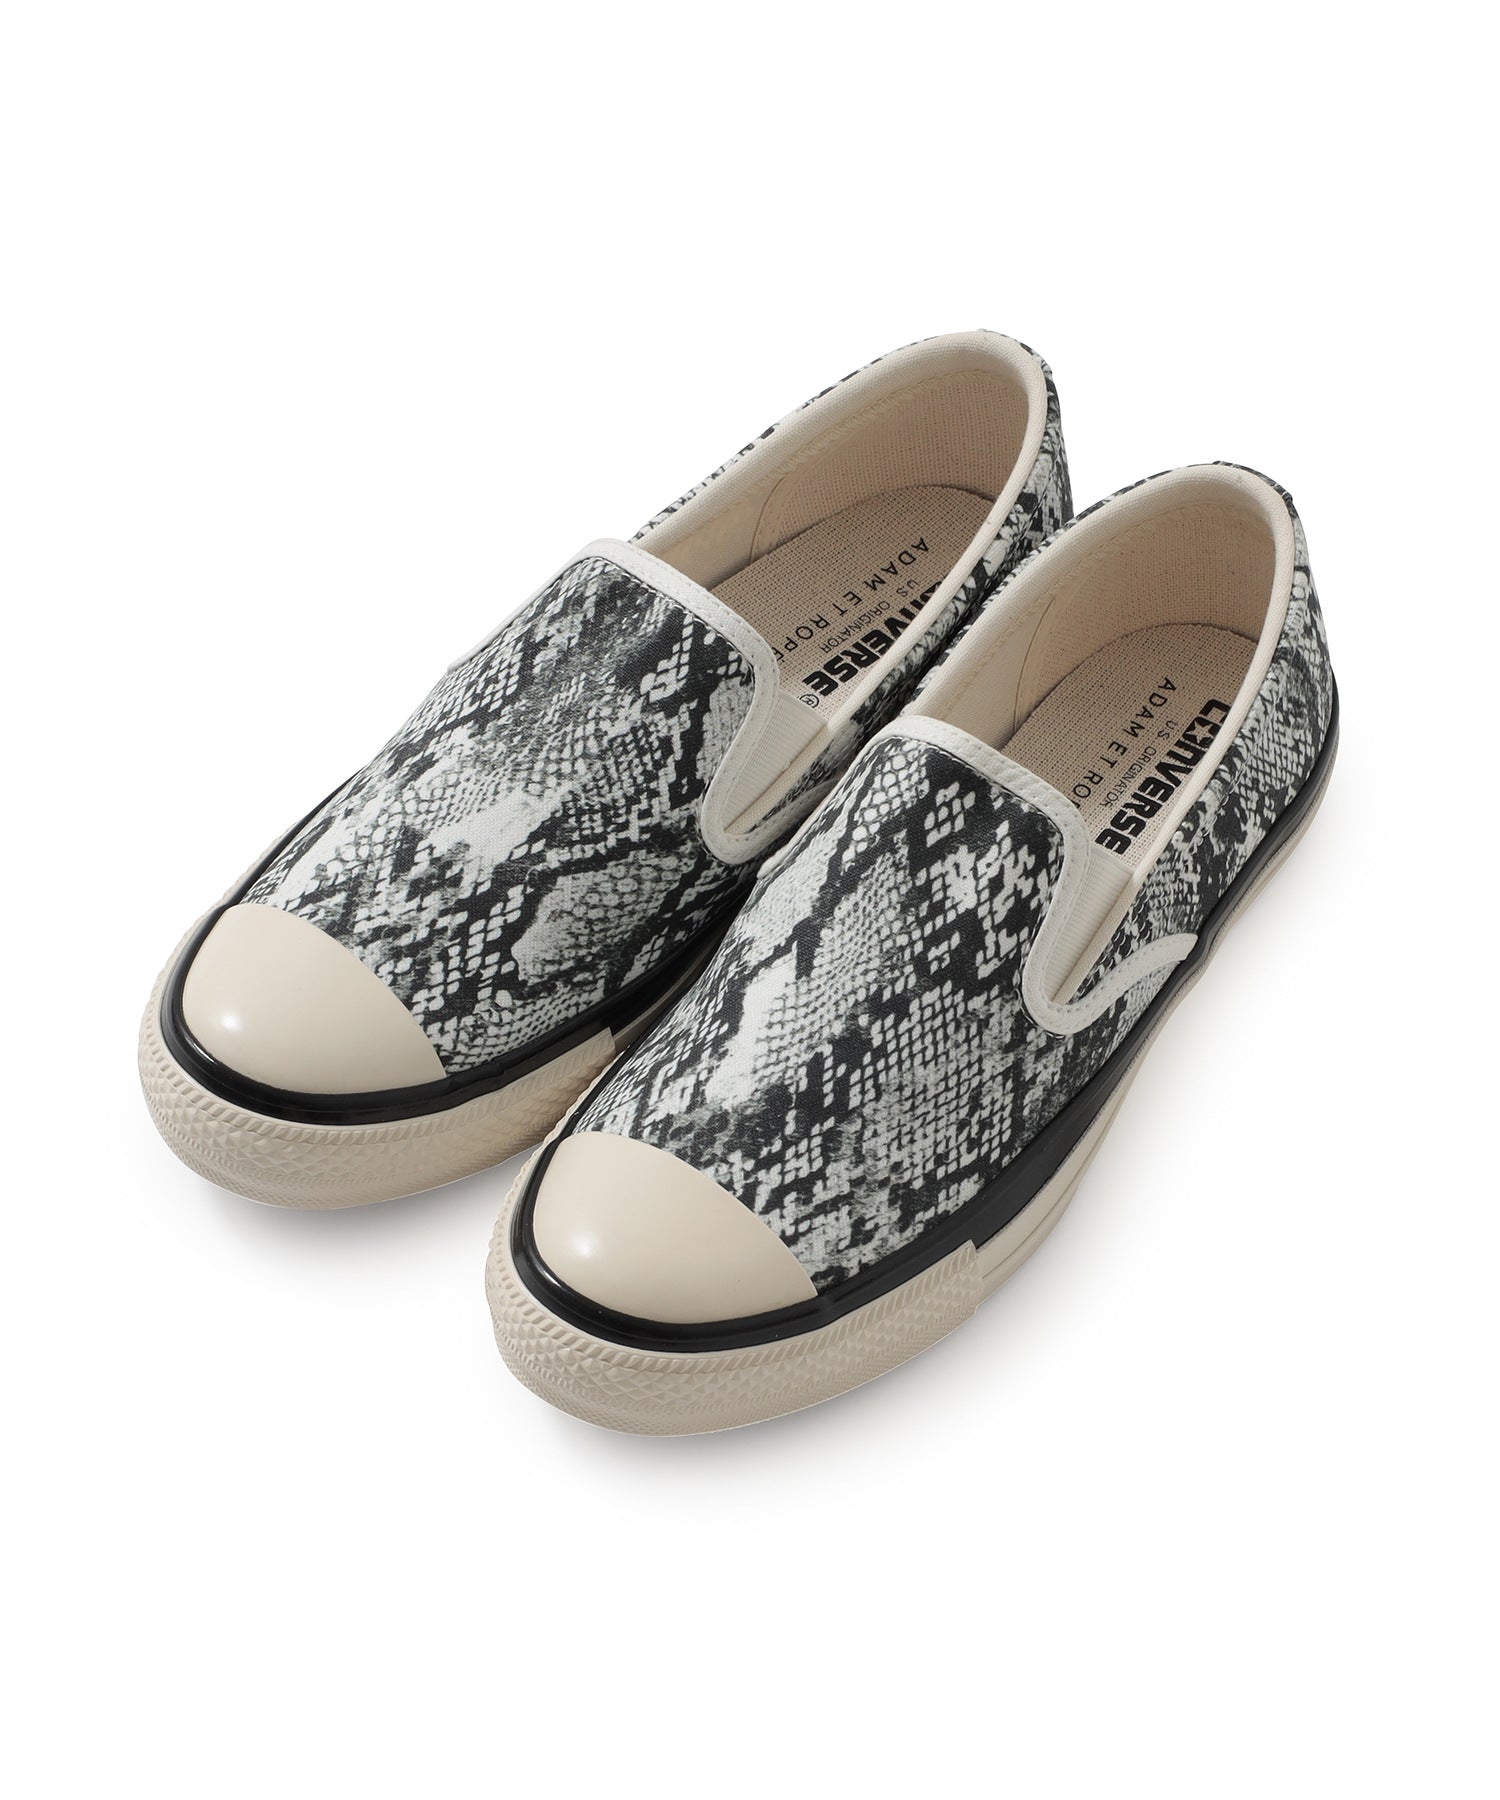 CONVERSE for ADAM ET ROPE'】EXCLUSIVE Python ALL STAR US SLIP-ON 